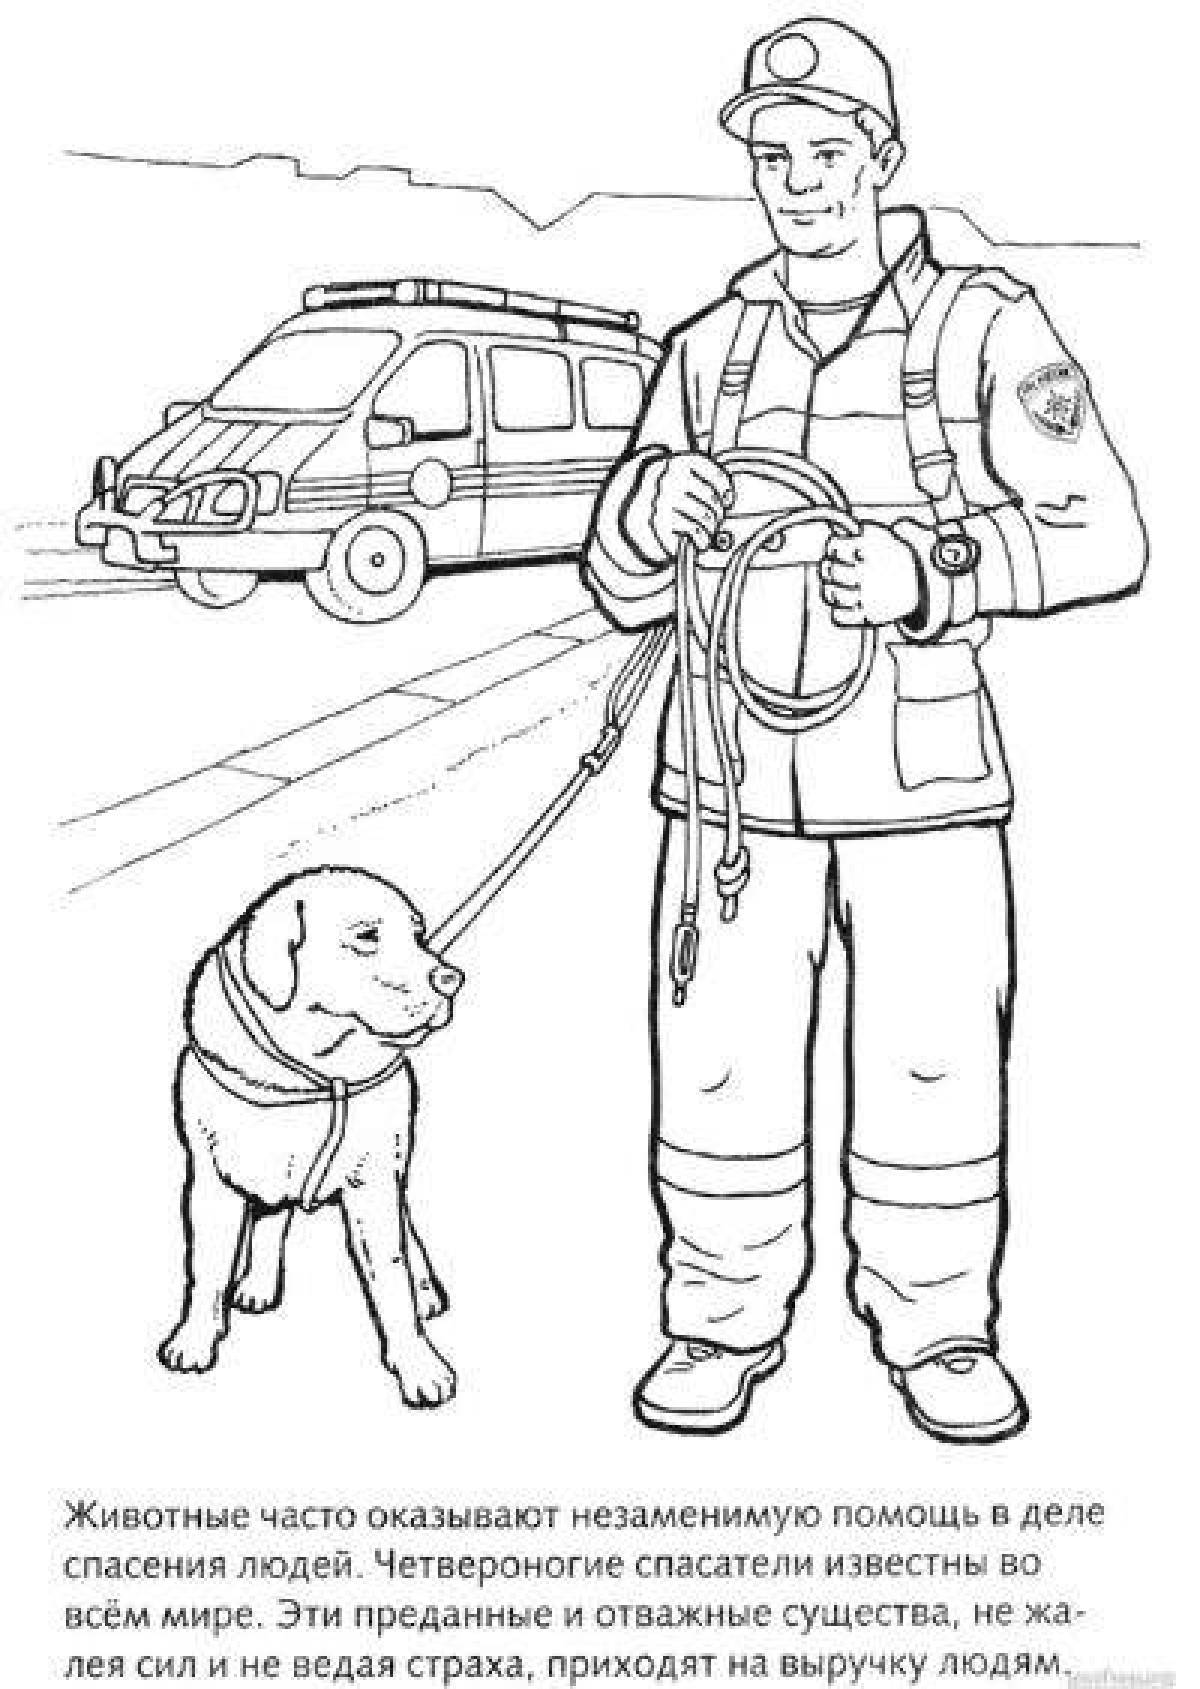 Crazy Rescuers coloring page